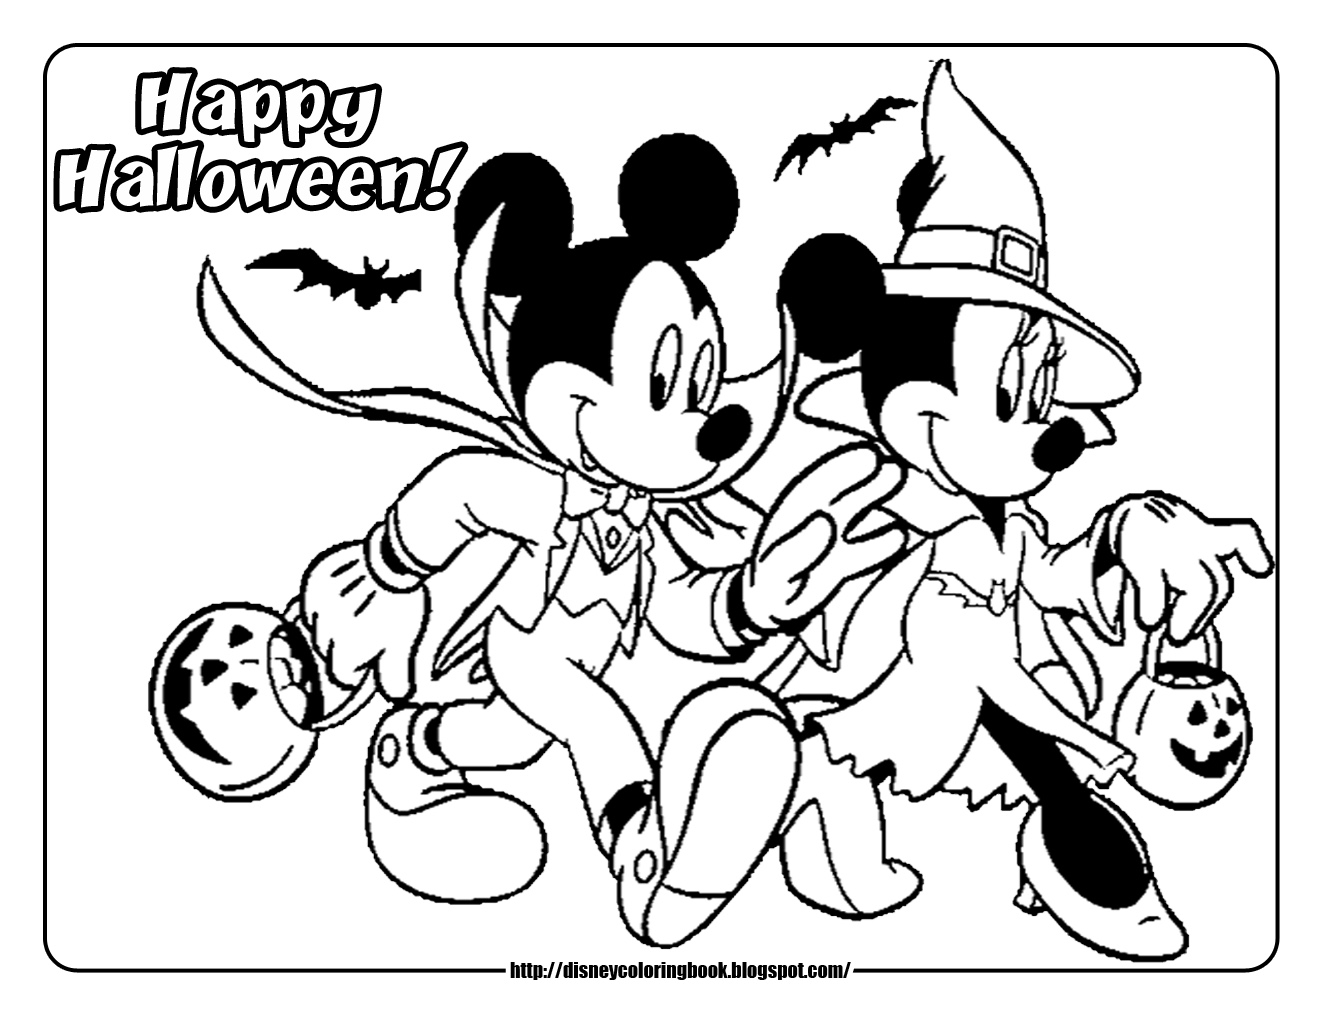 Mickey and Friends Halloween 2: Free Disney Halloween Coloring Pages